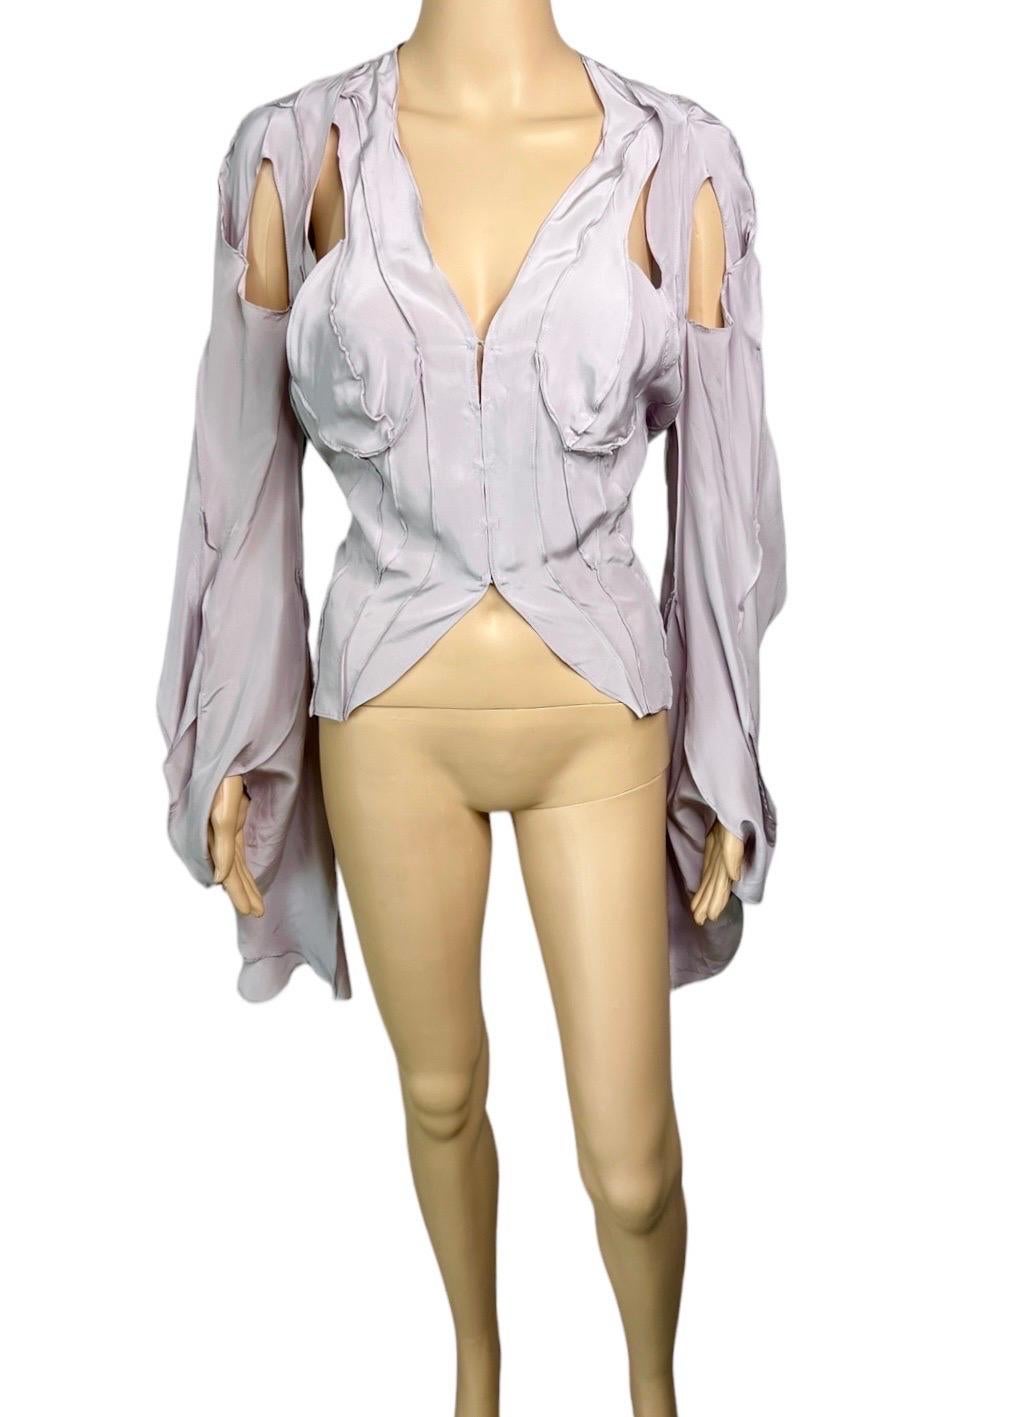 Tom Ford for Yves Saint Laurent YSL S/S 2003 Runway Cutout Shirt Blouse Top For Sale 7